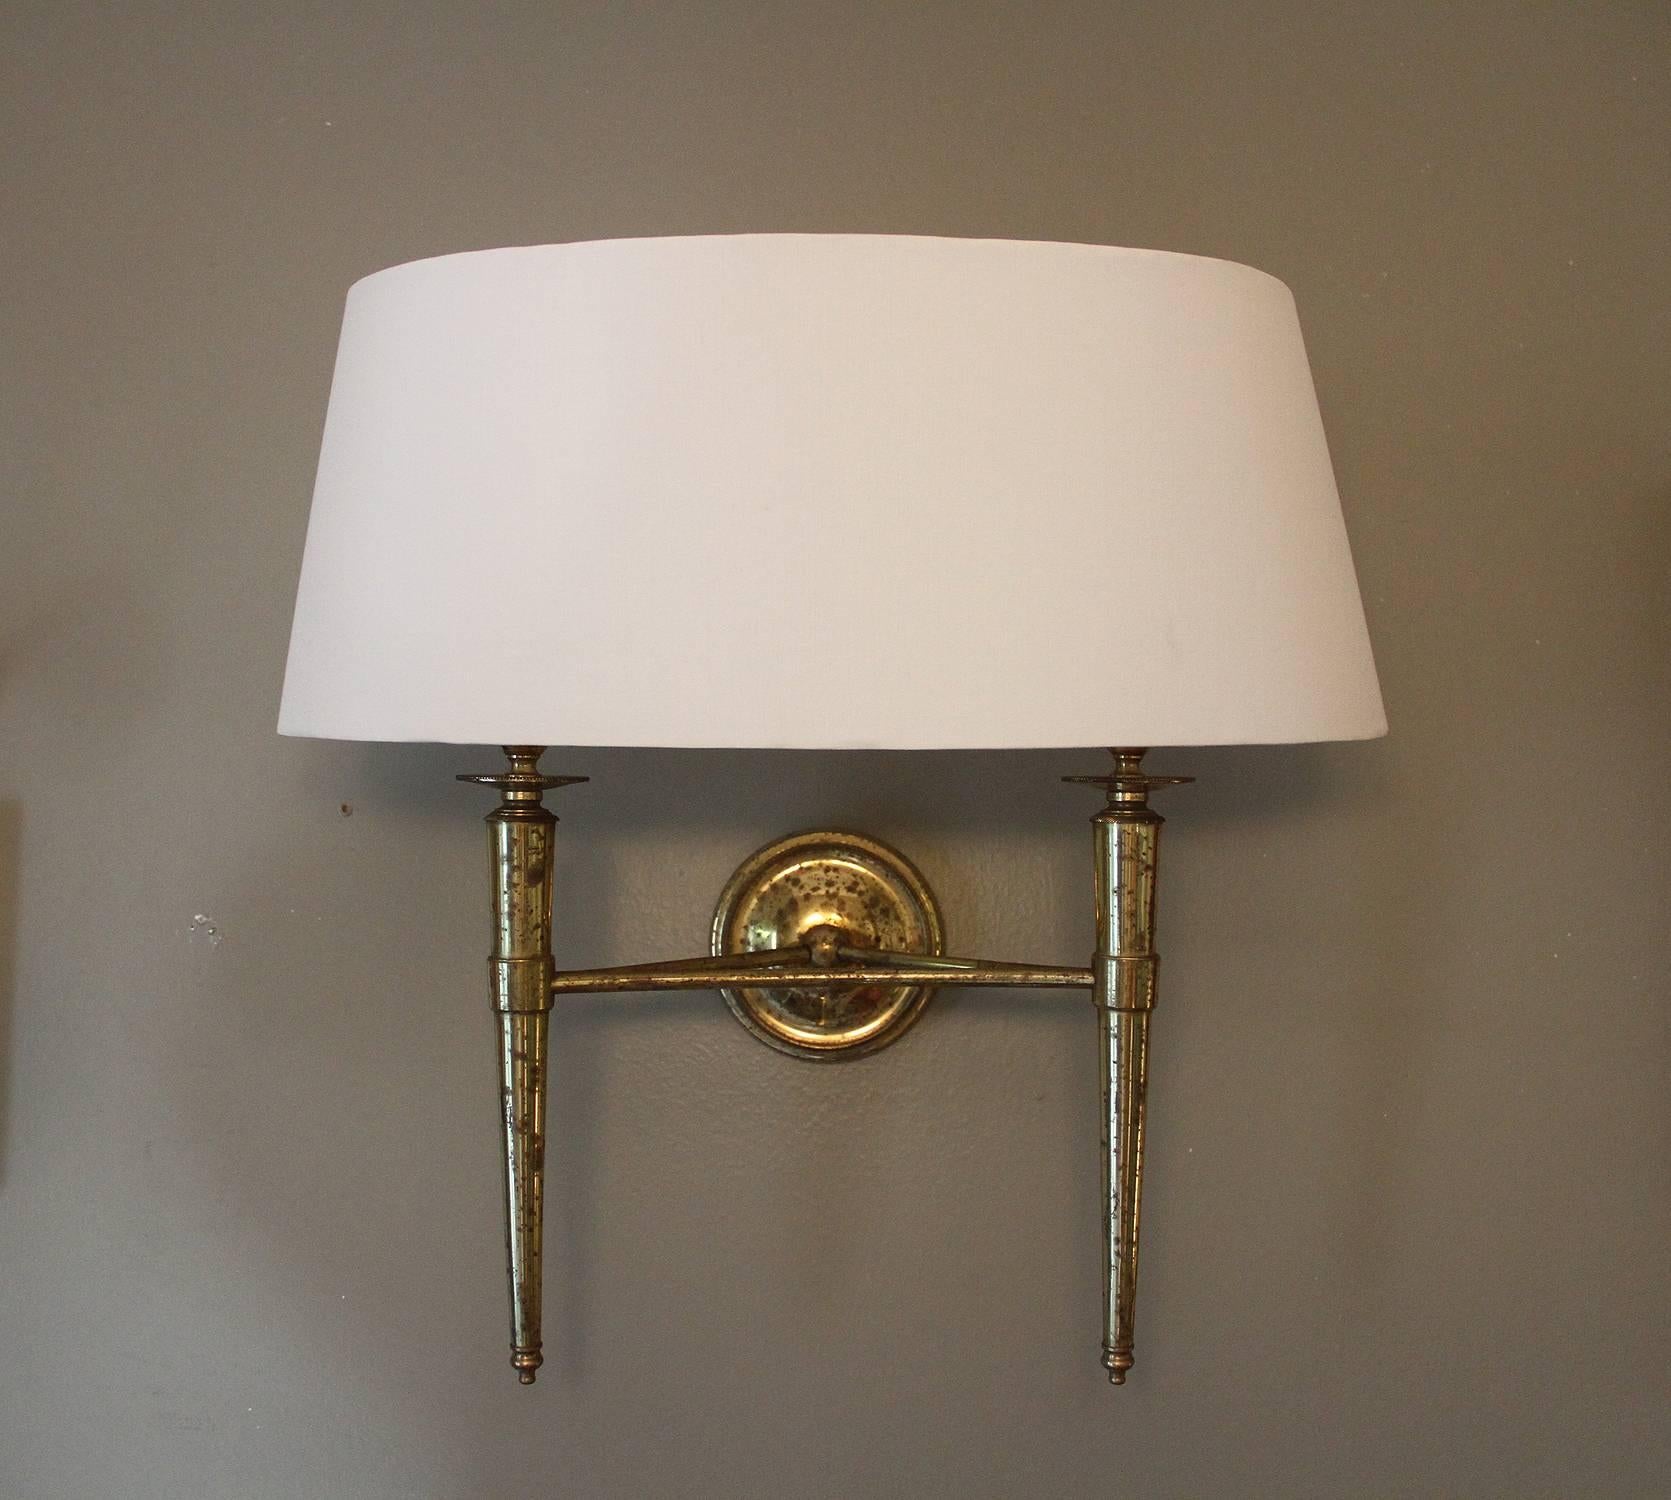 French Prince De Galles Hotel, Elegant 1940 Pair of Brass Sconces